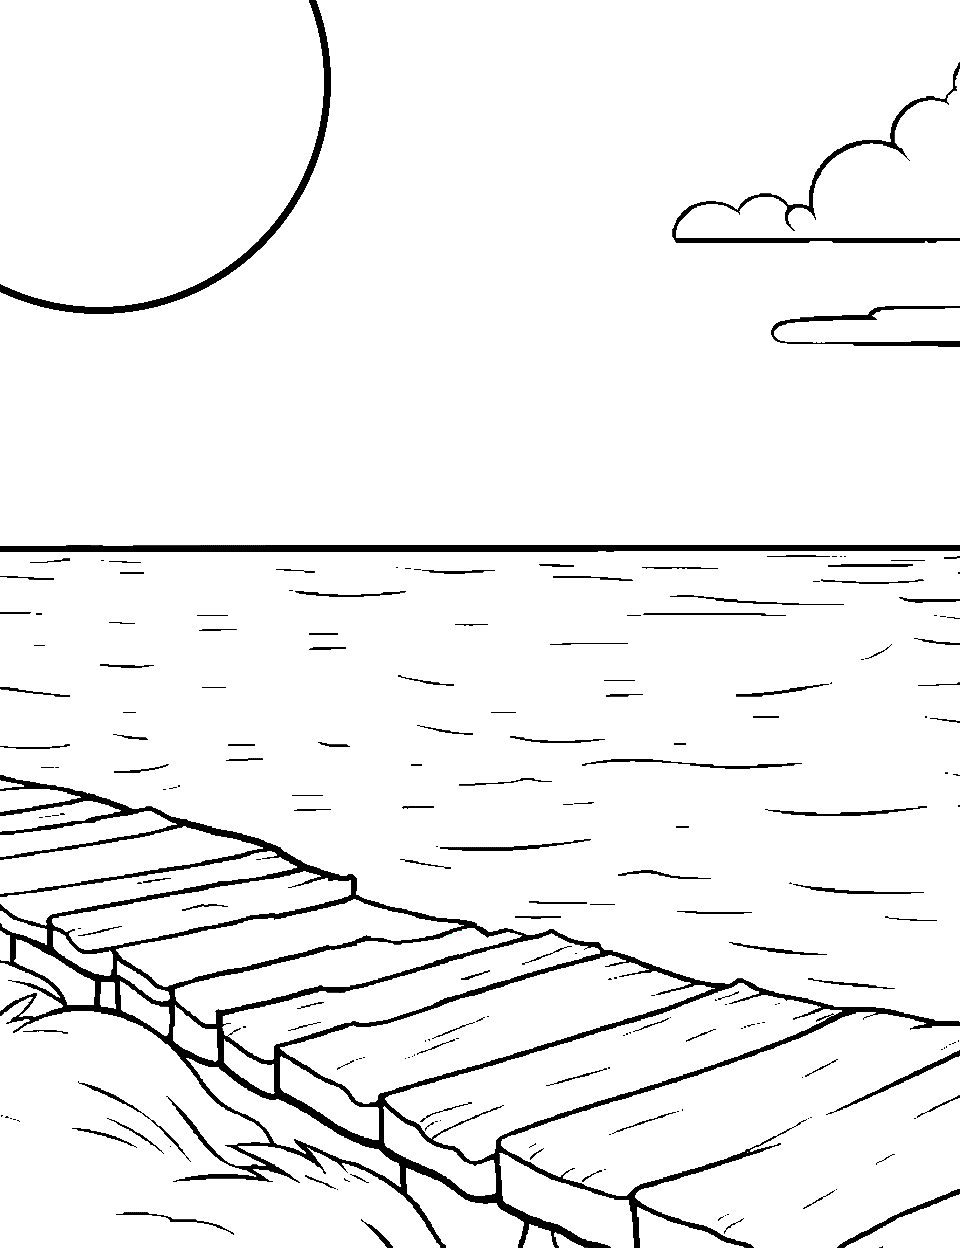 Fishing Pier at Dawn Ocean Coloring Page - An early morning scene with a small fishing pier and a calm ocean.